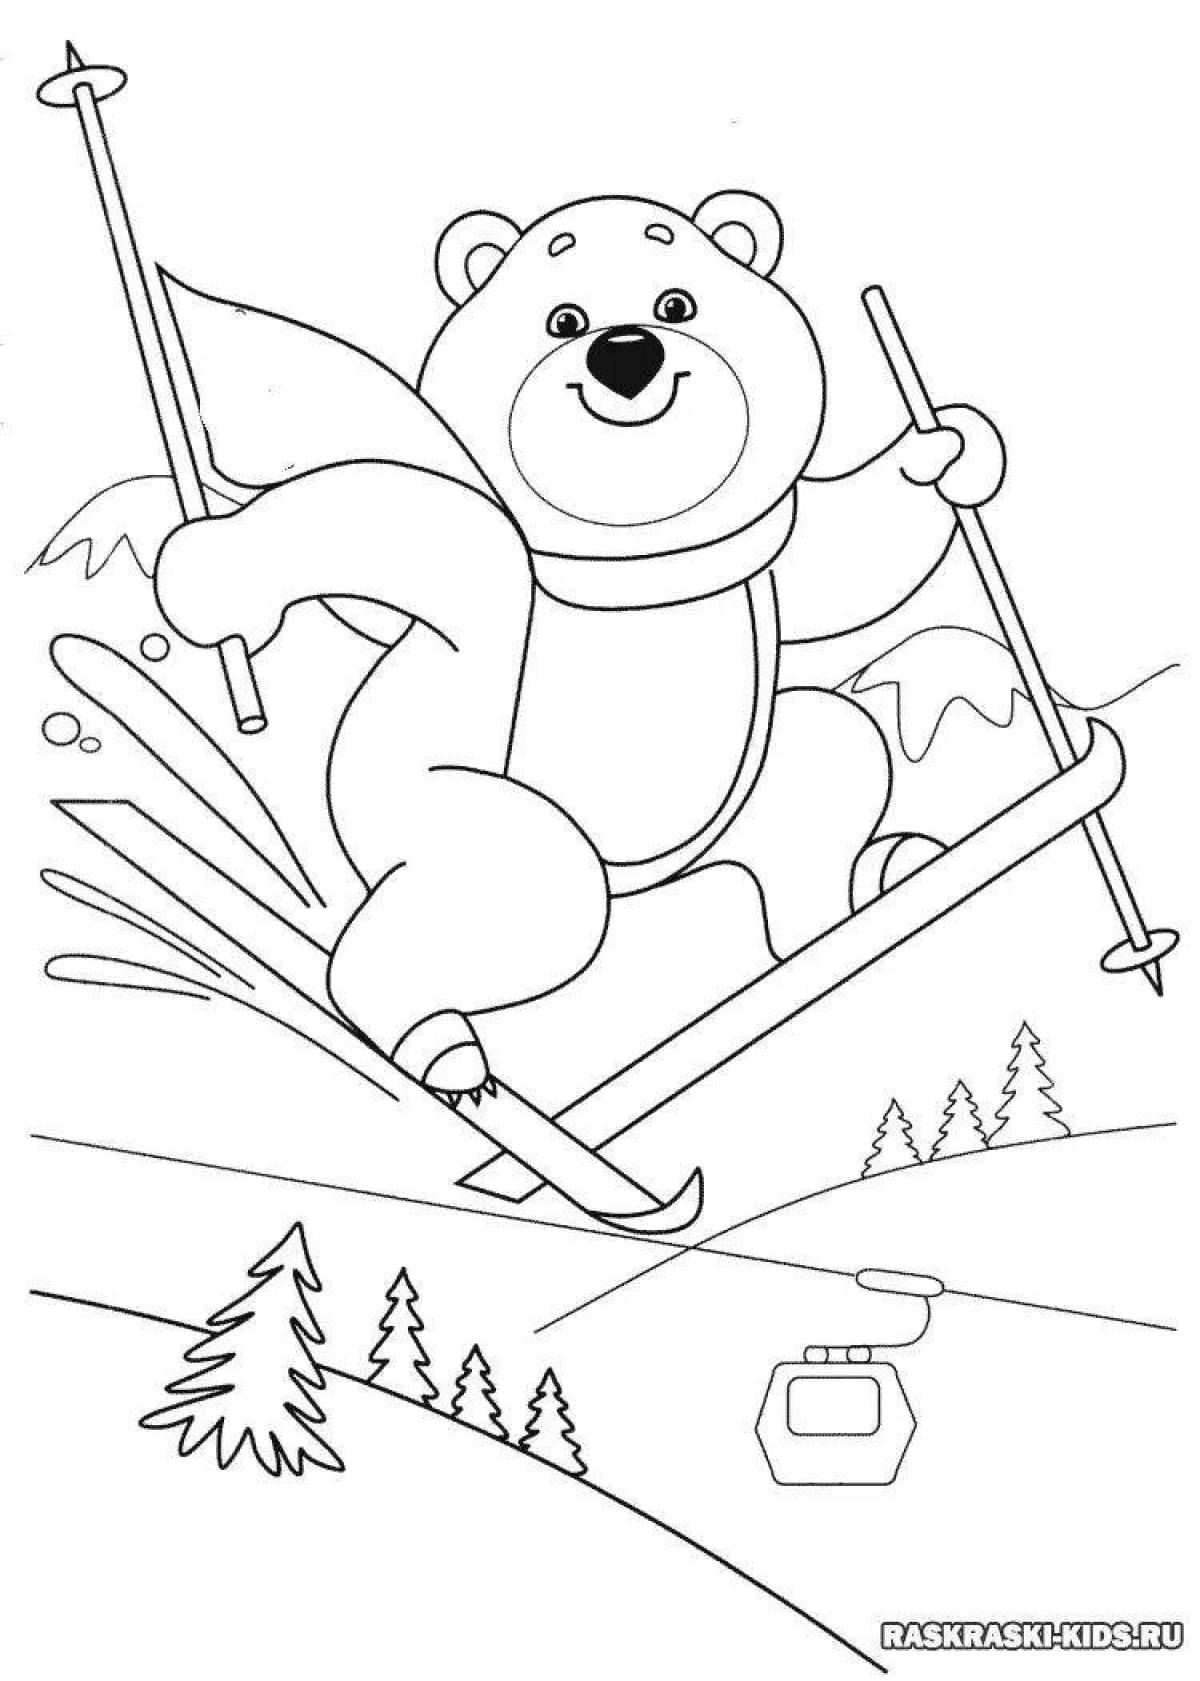 Great olympic coloring pages for kids